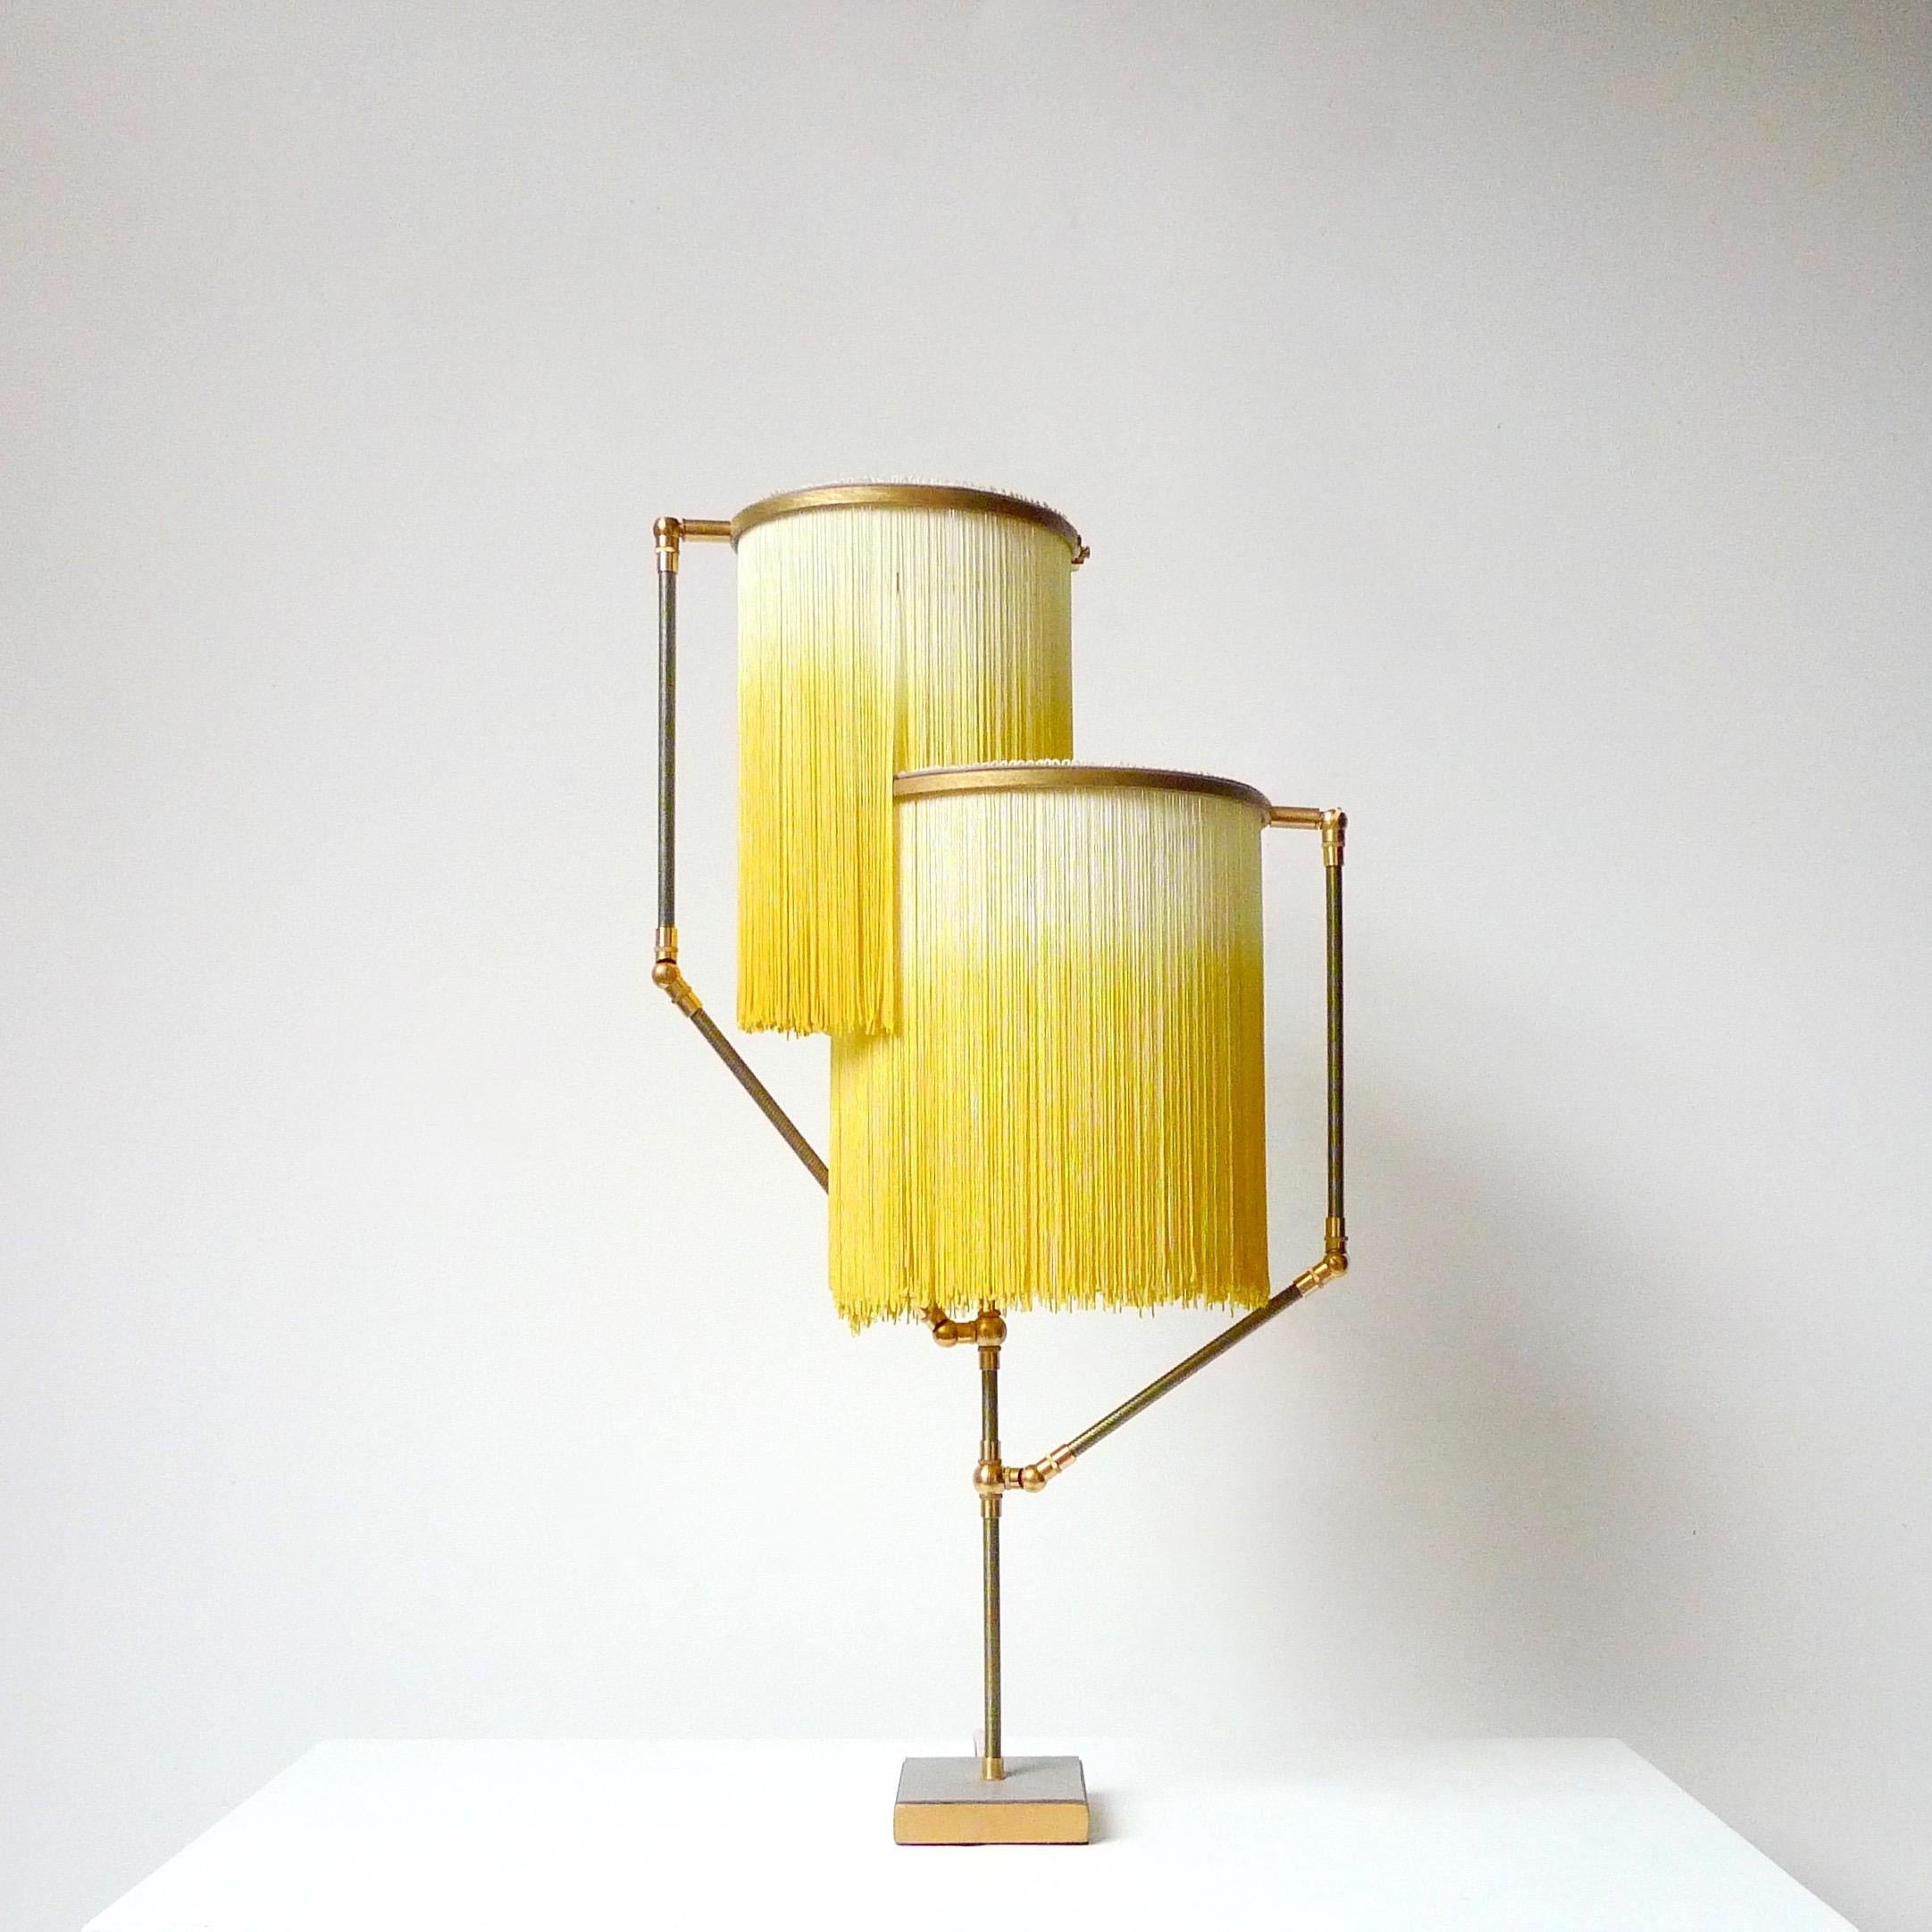 Yellow Charme table lamp, Sander Bottinga.

Dimensions: H 73 x W 38 x D 25 cm.

Handmade in brass, leather, wood and dip dyed colored Fringes in viscose.
The movable arms makes it possible to move the circles with fringes in different positions.
So